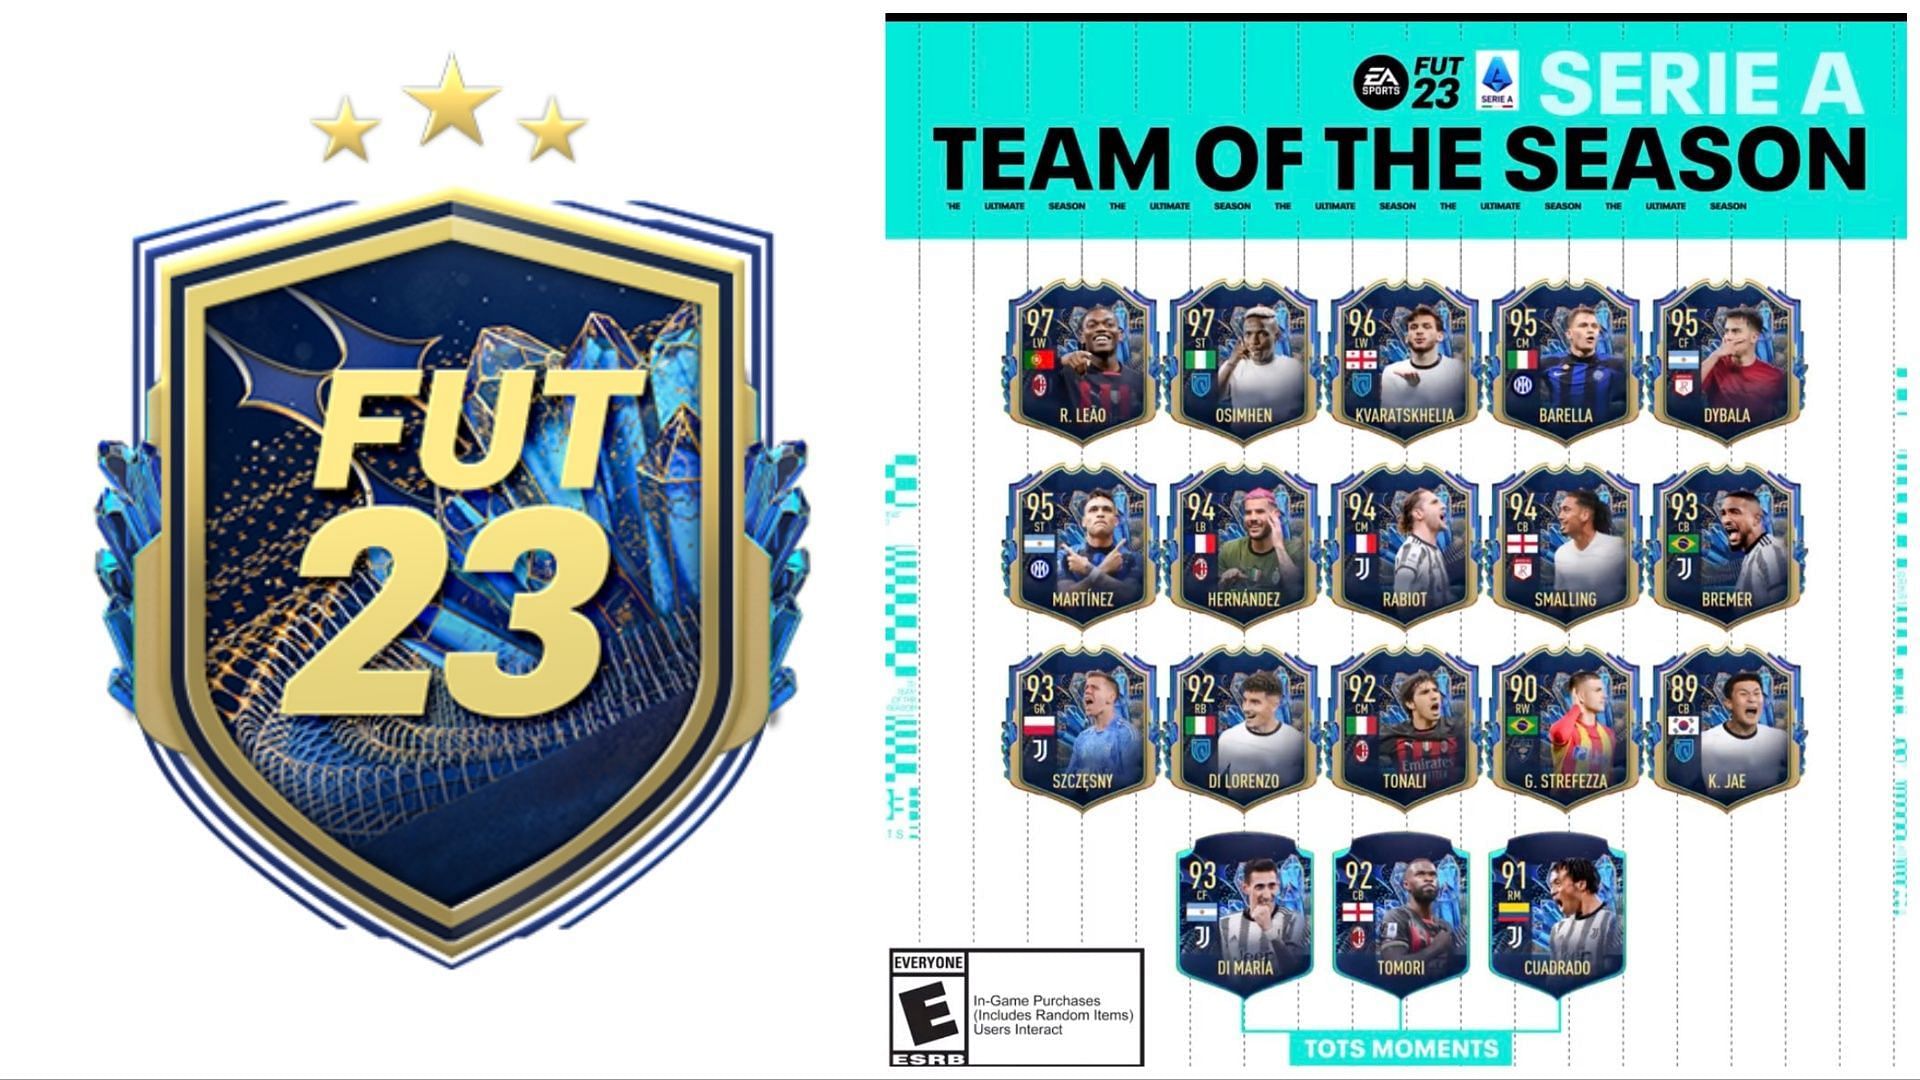 TOTS Challenge 9 is now available (Images via EA Sports)